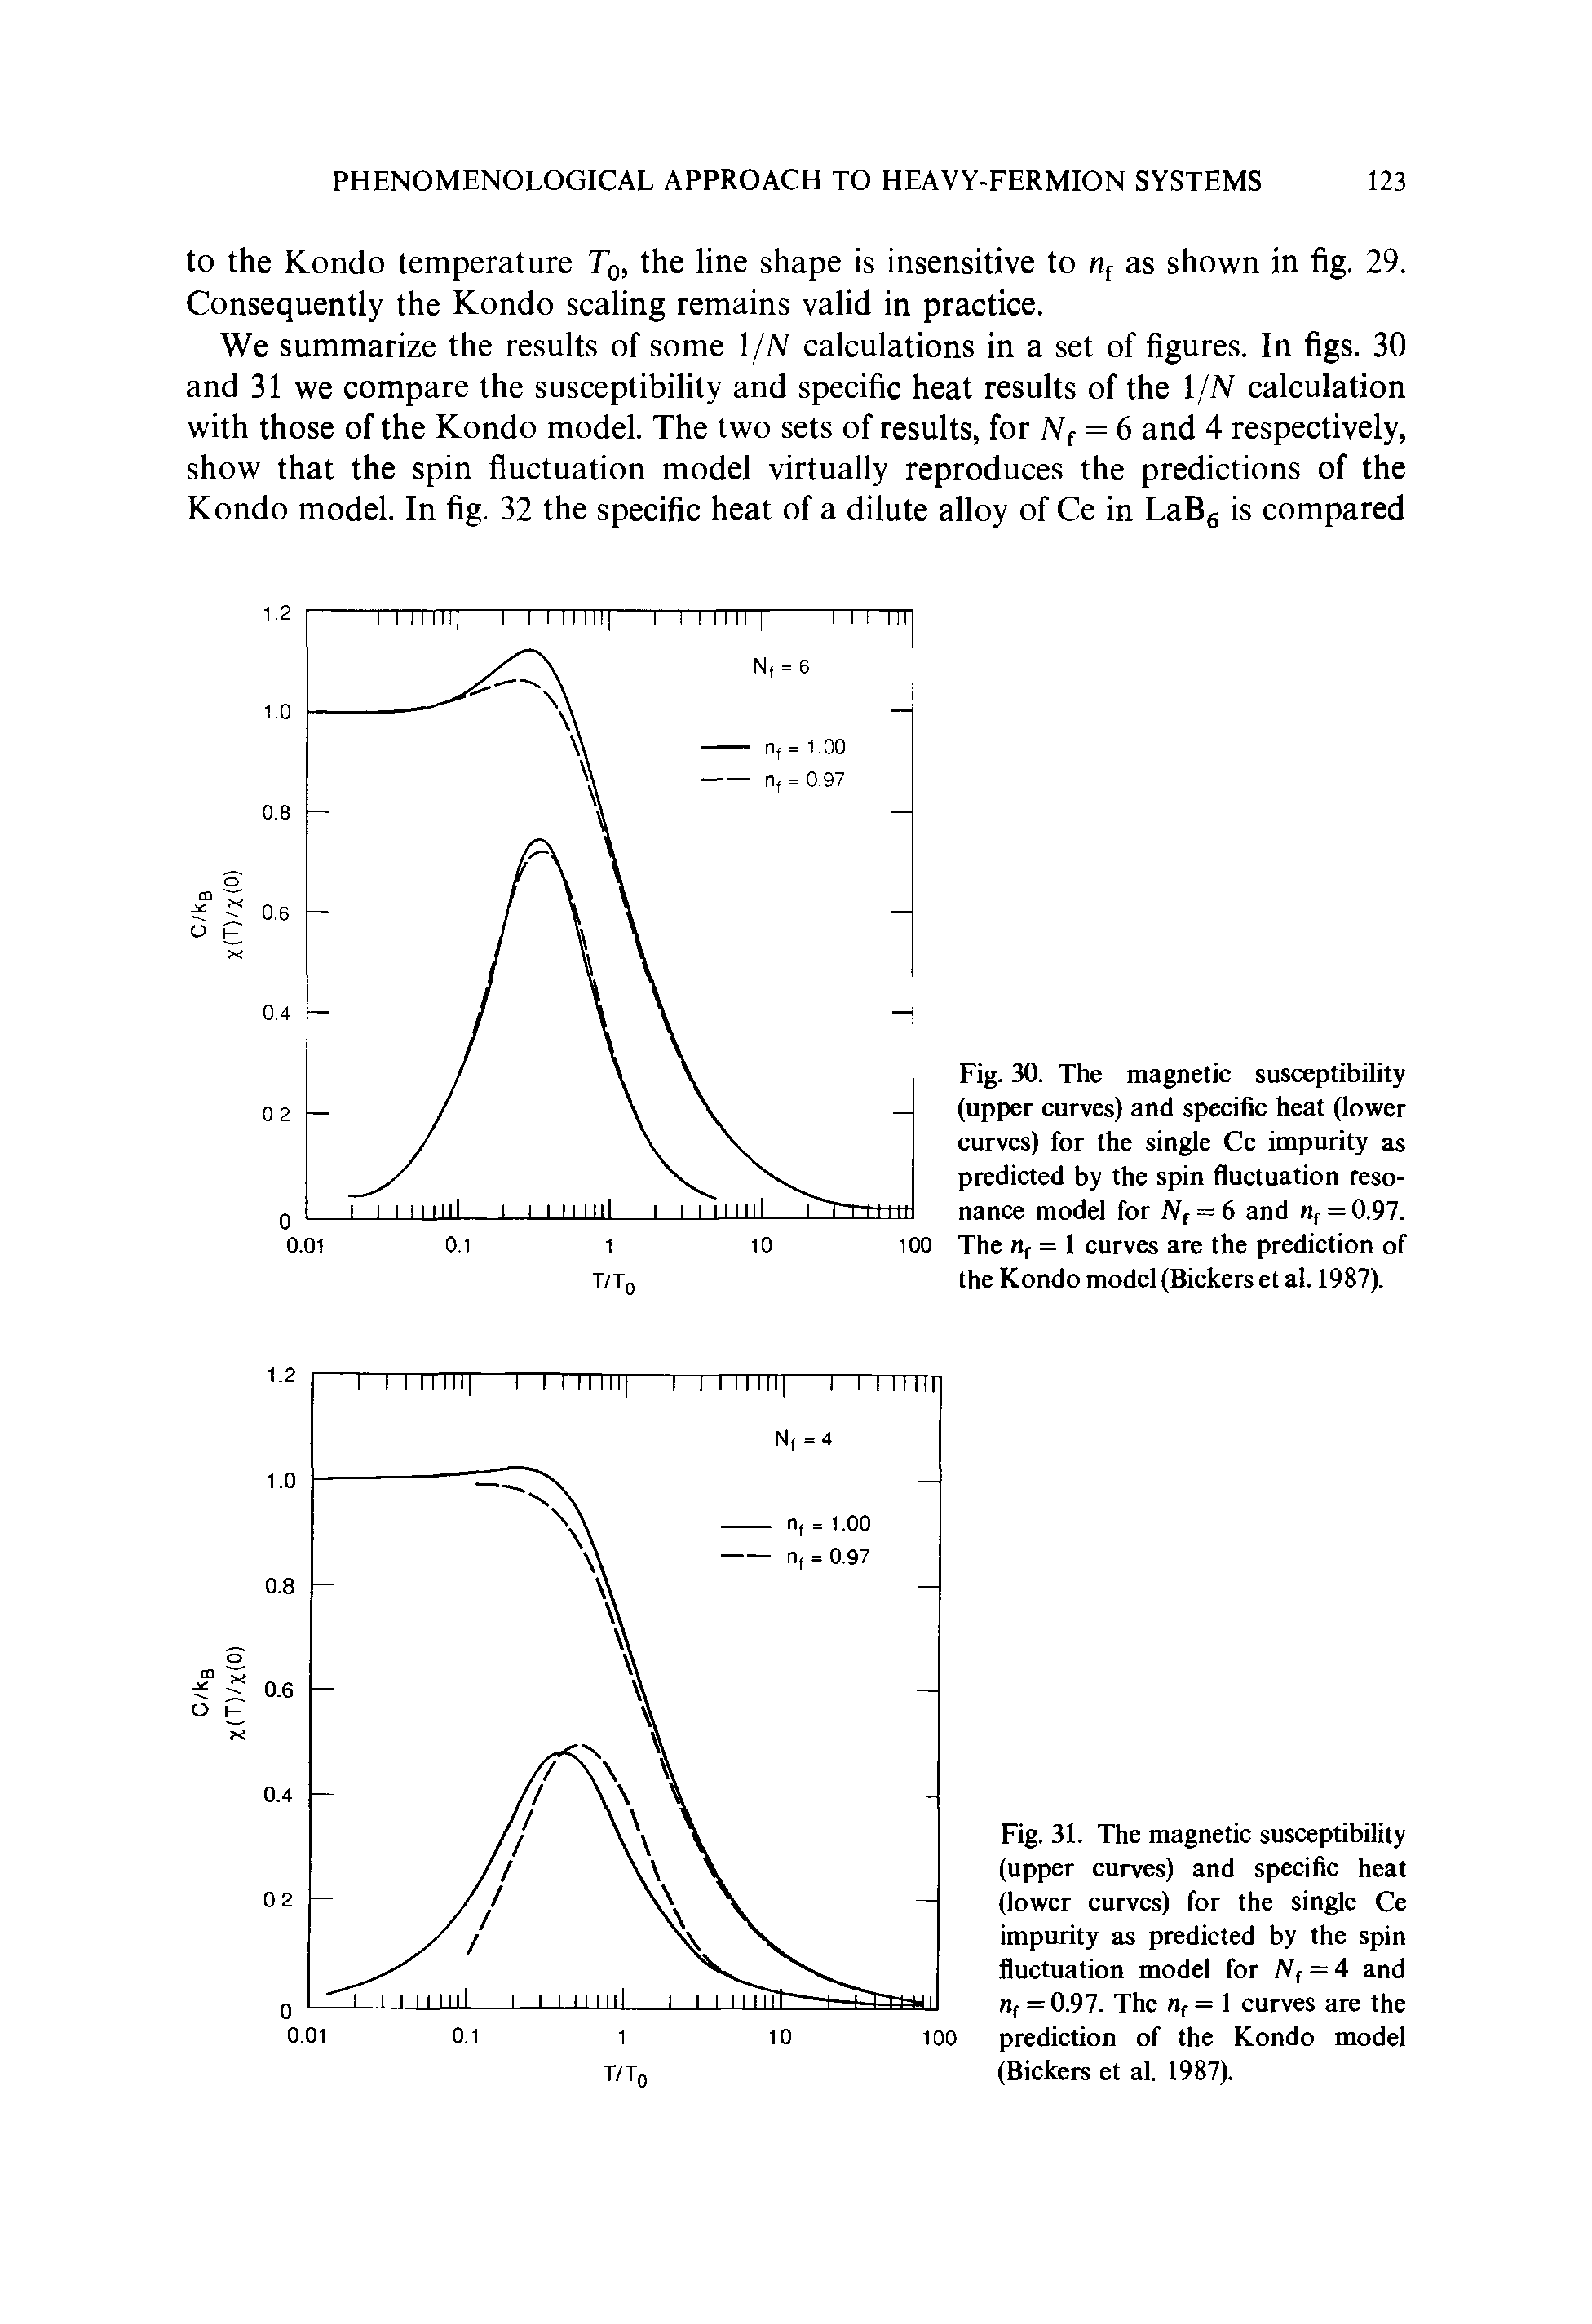 Fig. 30. The magnetic susceptibility (upper curves) and specific heat (lower curves) for the single Ce impurity as predicted by the spin fluctuation resonance model for JV, = 6 and n, = 0.97. The itf = I curves are the prediction of the Kondo model (Bickers et al. 1987).